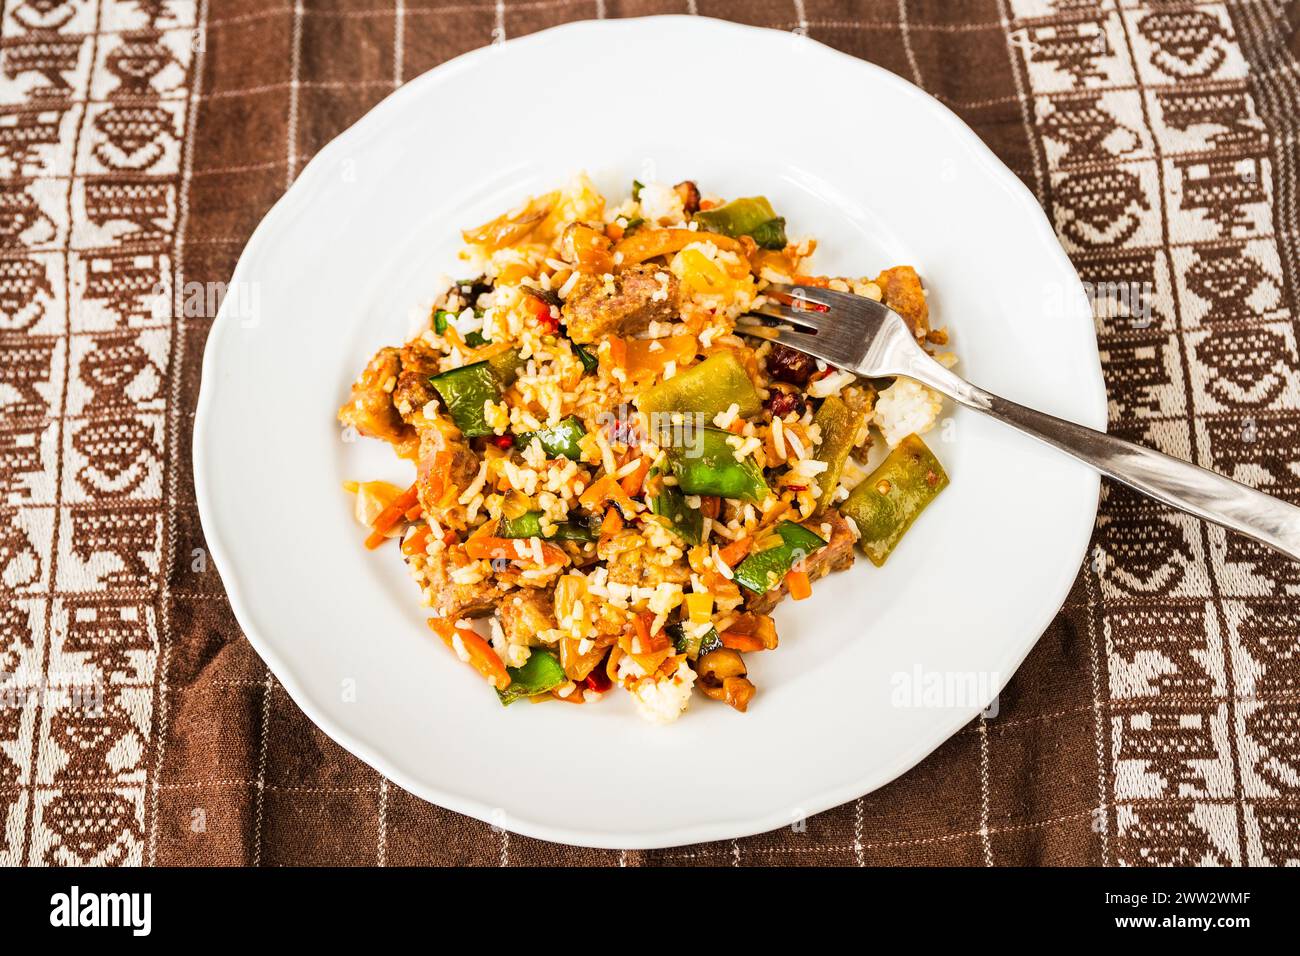 Vegetarian risotto with mushroom, pea pod and vegetable, fork on plate on tablecloth. Stock Photo